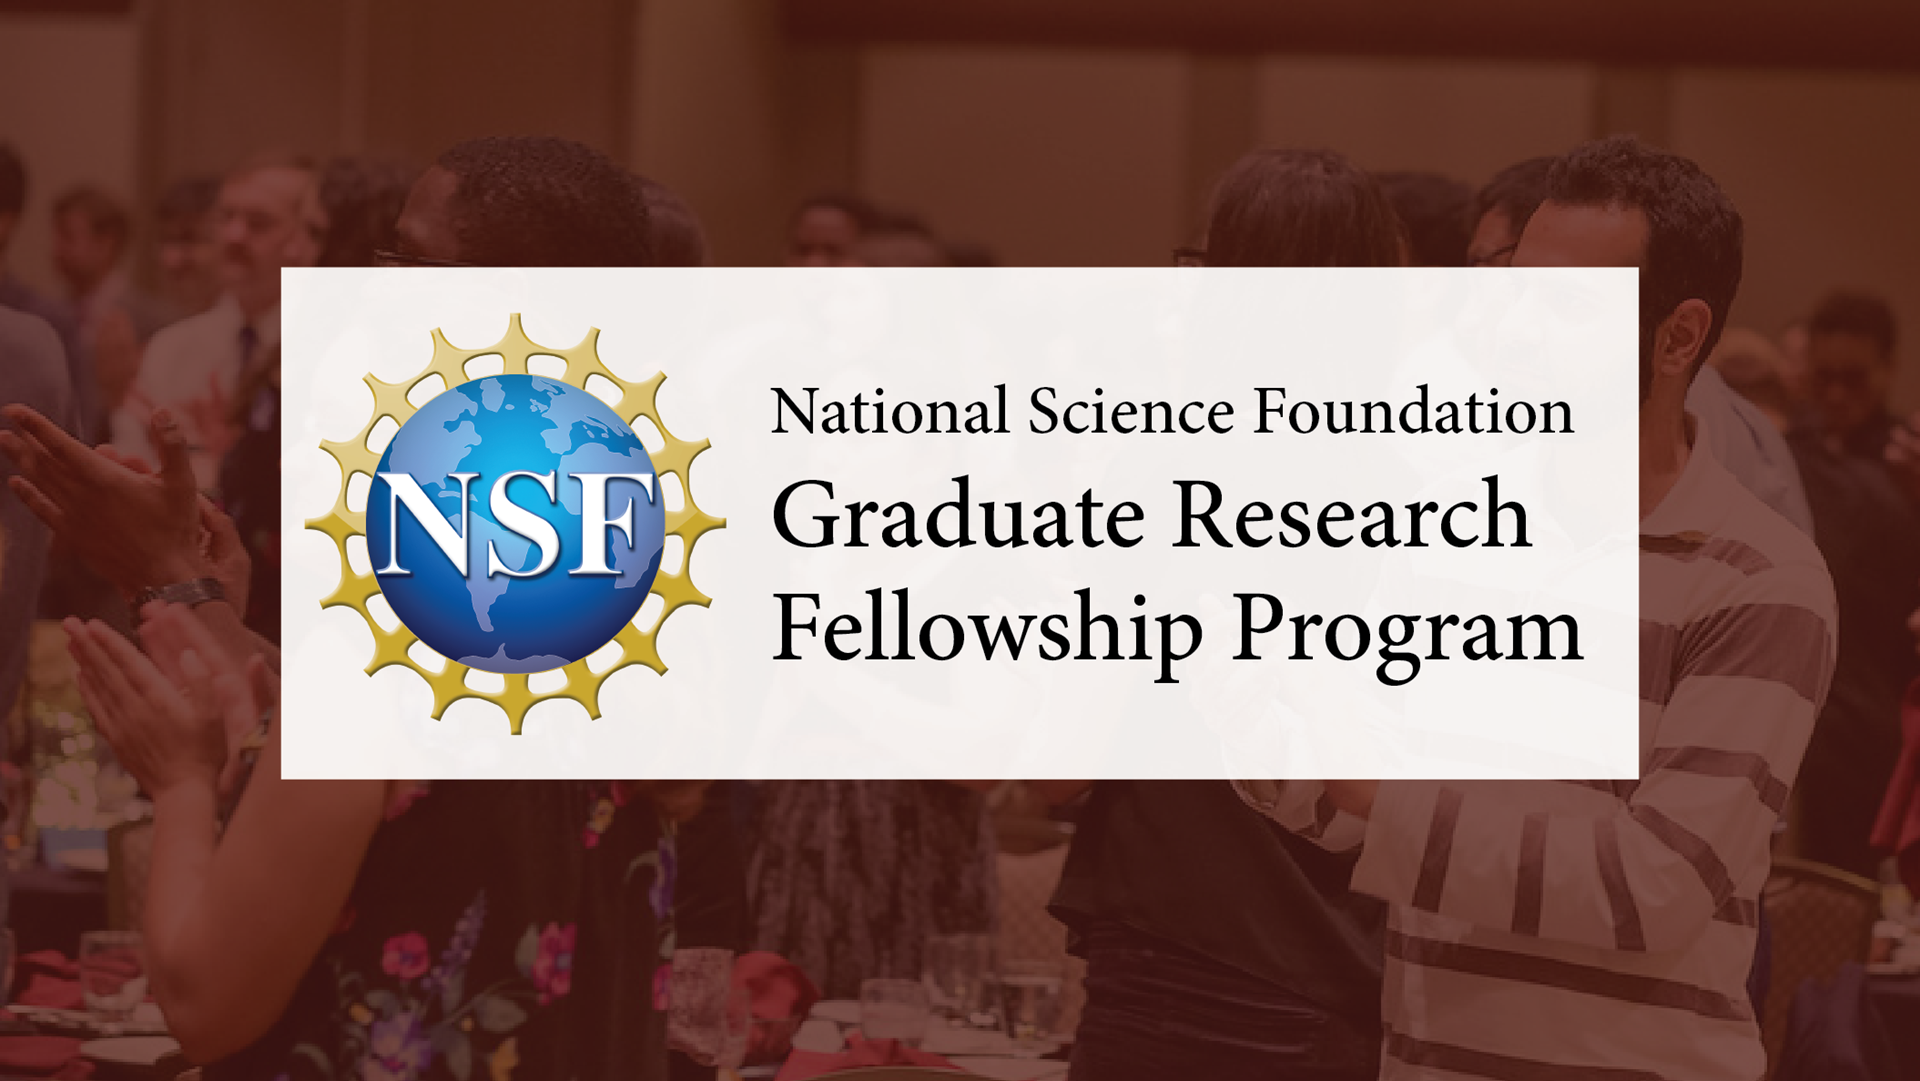 Seventeen Current and Former Students Awarded NSF Graduate Research Fellowships  teaser image